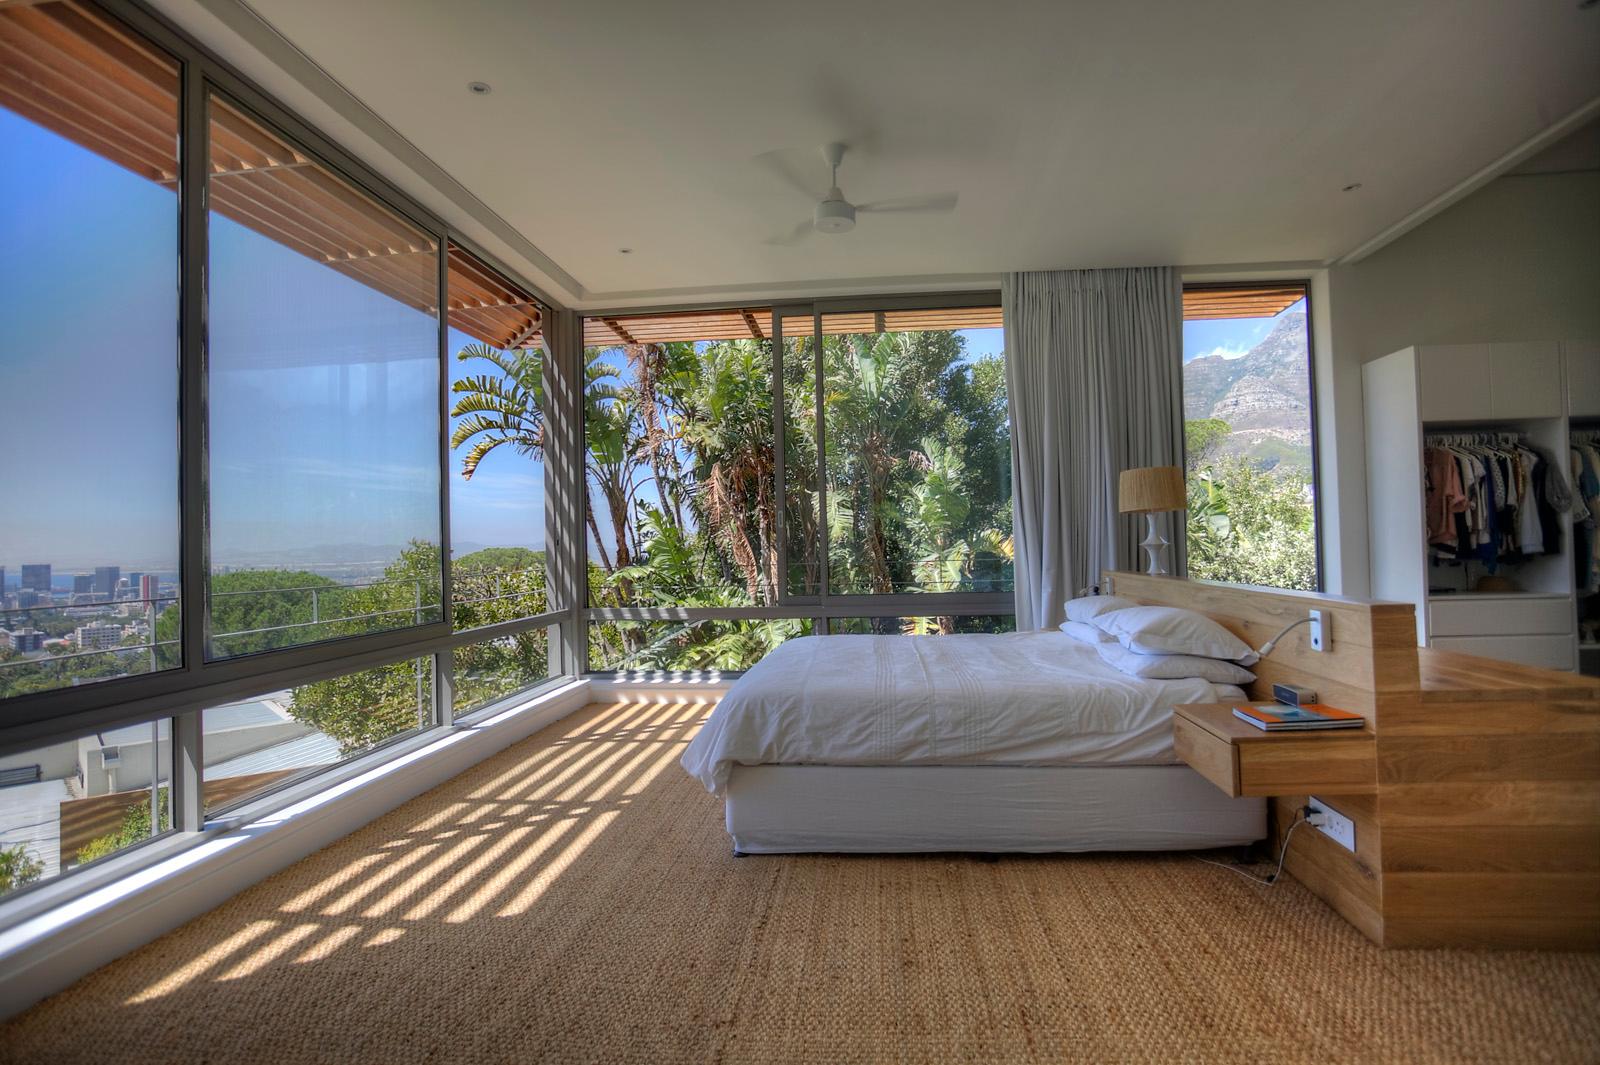 Photo 9 of Higgovale Chic accommodation in Higgovale, Cape Town with 5 bedrooms and 4.5 bathrooms